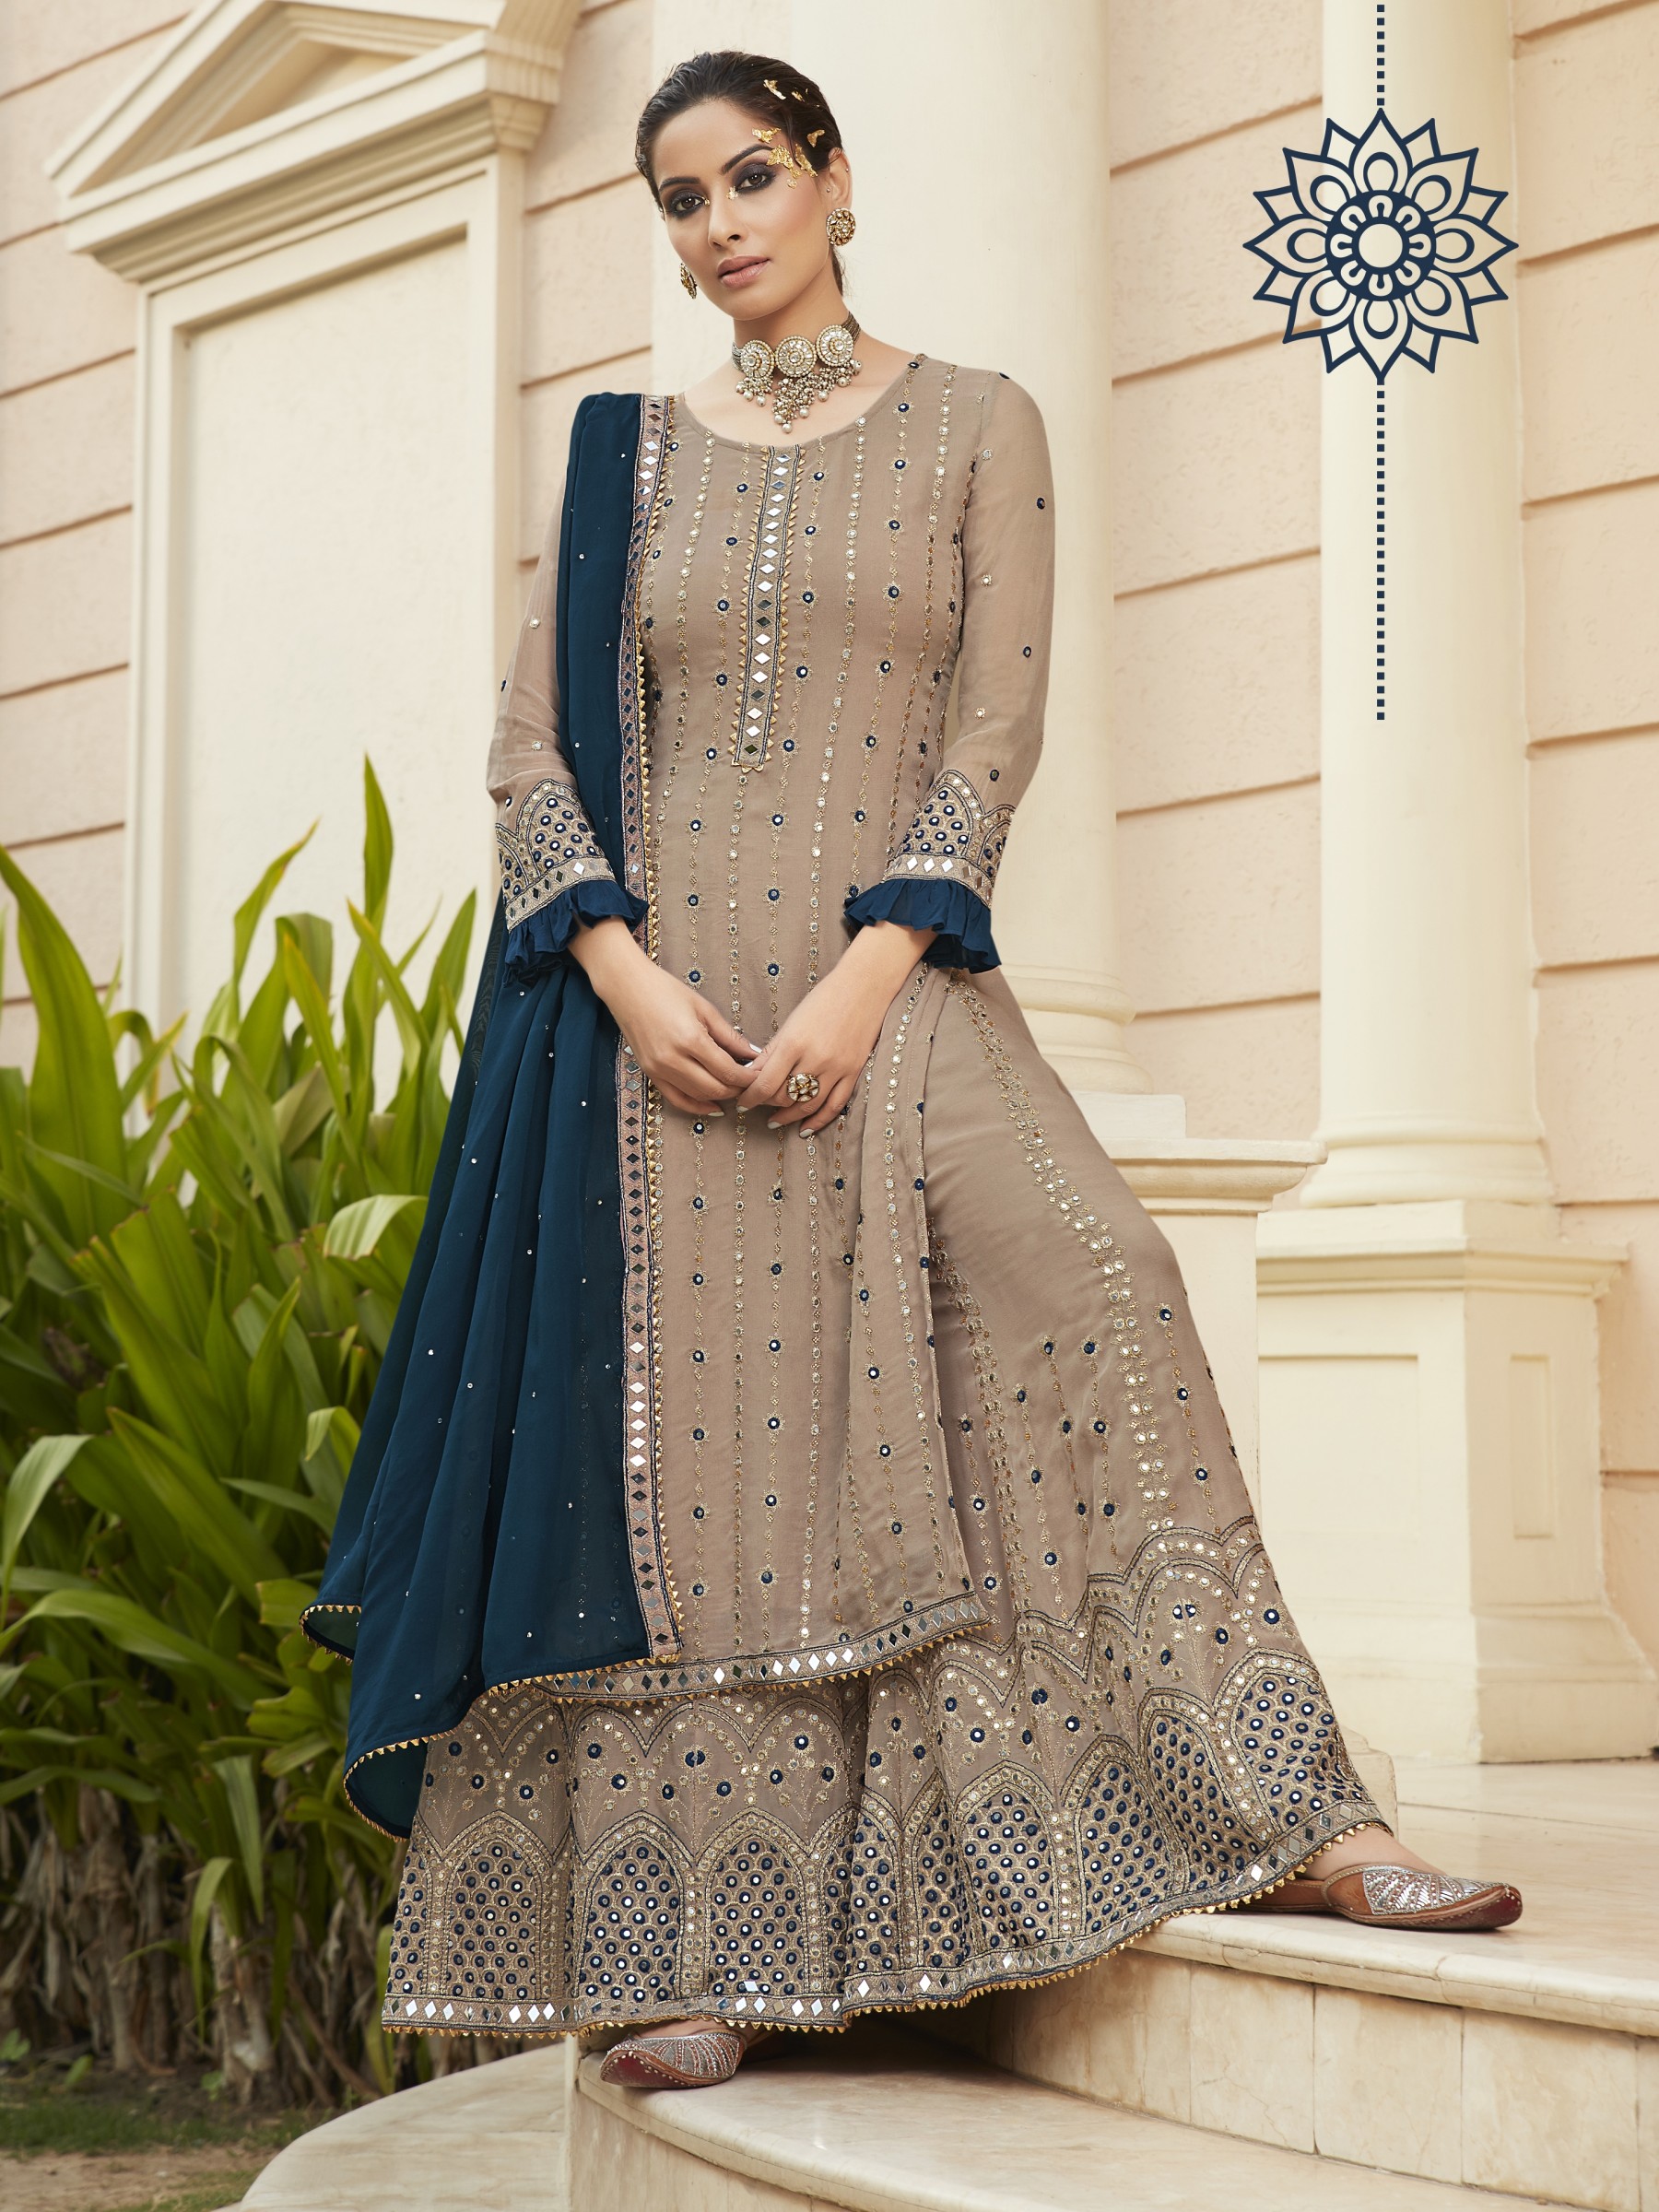  Pure Georgette Party Wear  Readymade  Sarara in Beige Color with  Embroidery Work